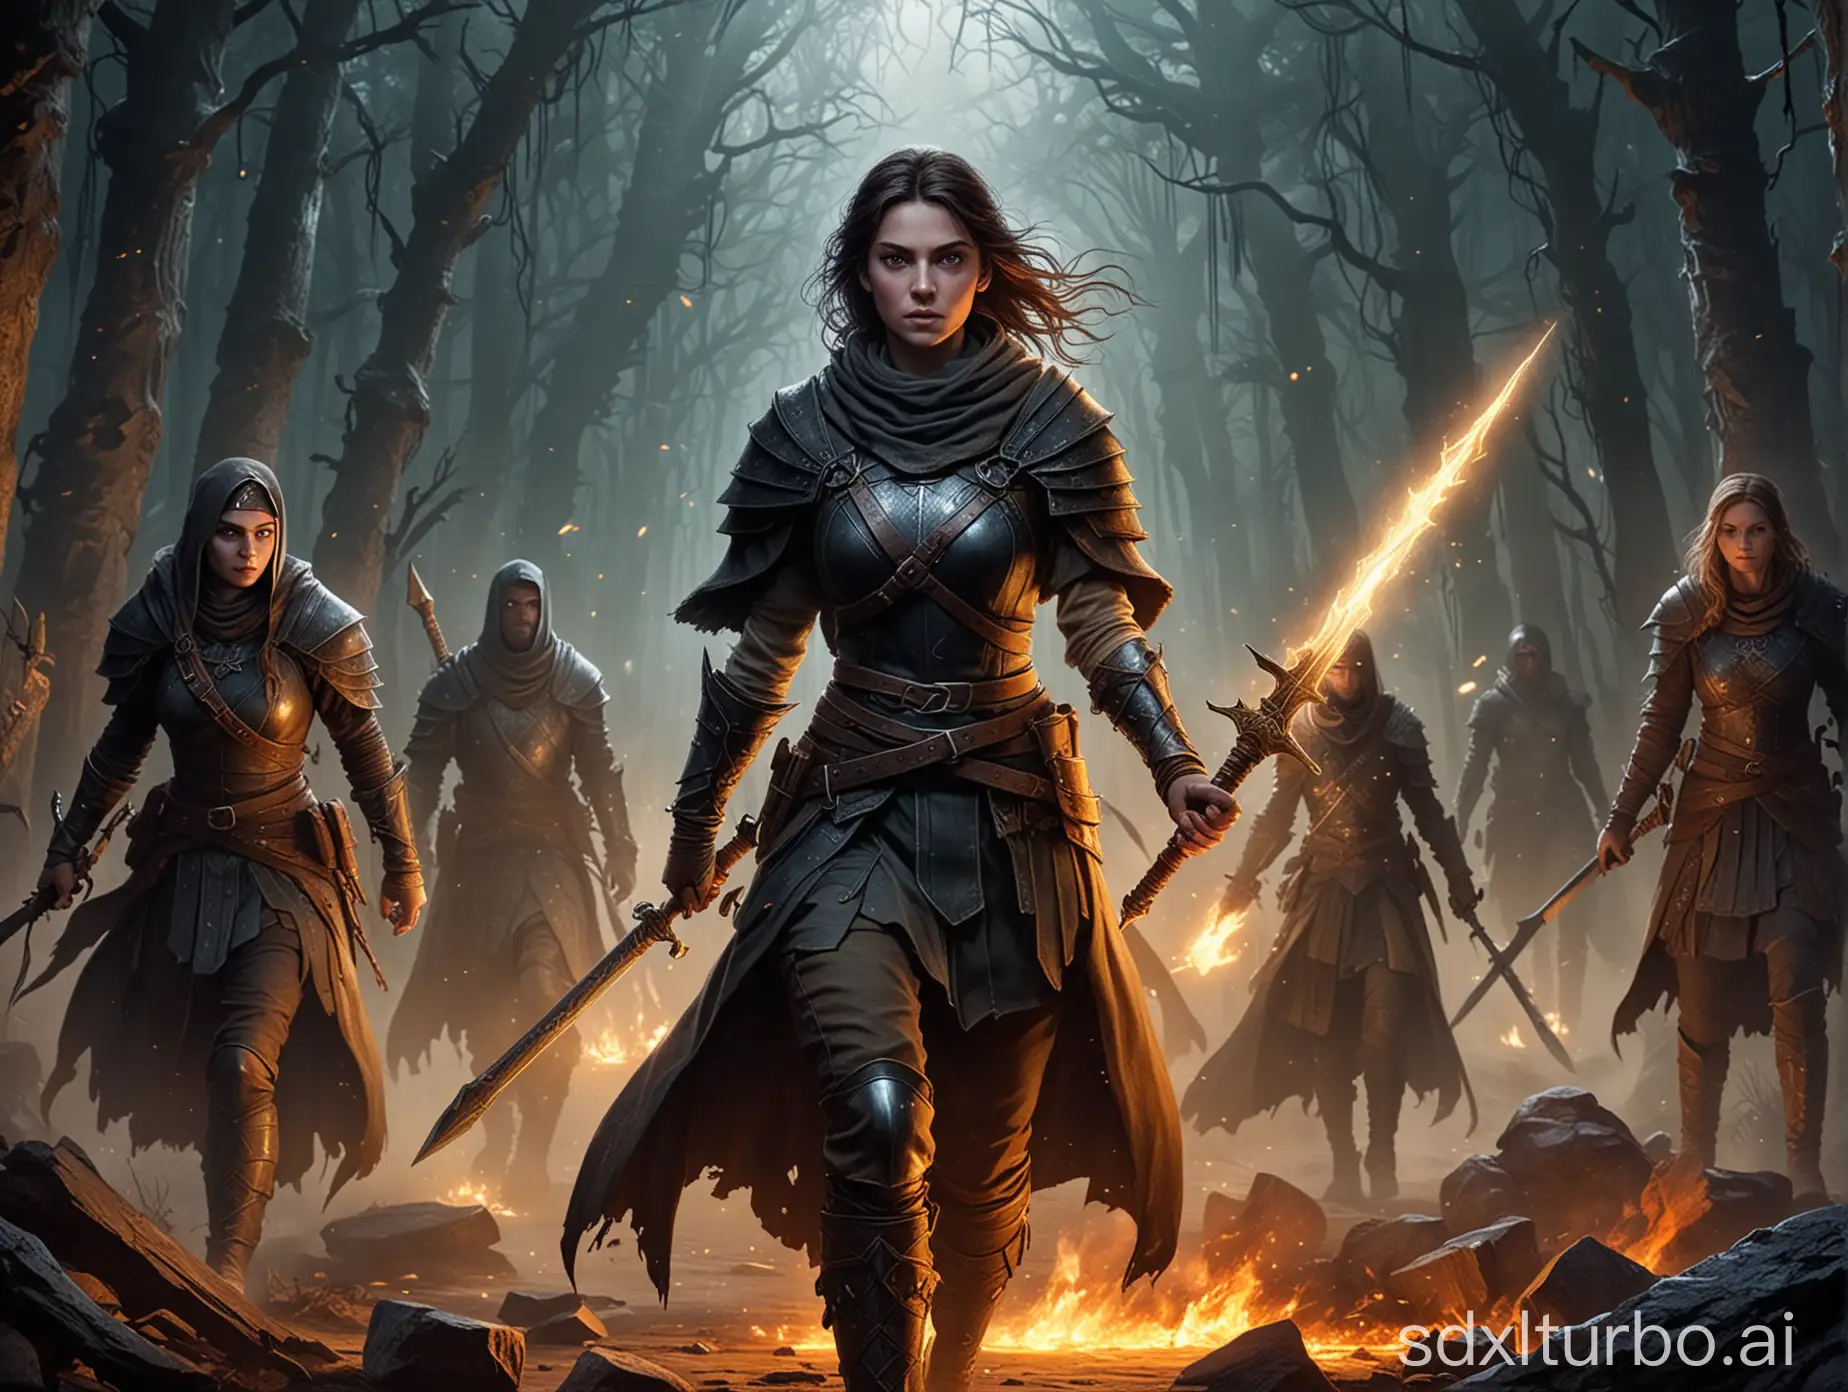 The young sorceress Arya forms an alliance with three of her companions—a valian, heavily armed knight, a mysterious, powerful witch, and a swift and skilled ranger—on a challenging journey. Their goal is to confront the dark forces of Selen and protect the peace of the continent. In the forgotten ruins, they scour for ancient runes and clues while braving fierce battles against dark creatures lurking in the shadows. Every victory was hard-won, but their faith and courage kept them moving forward and illuminated the way forward.